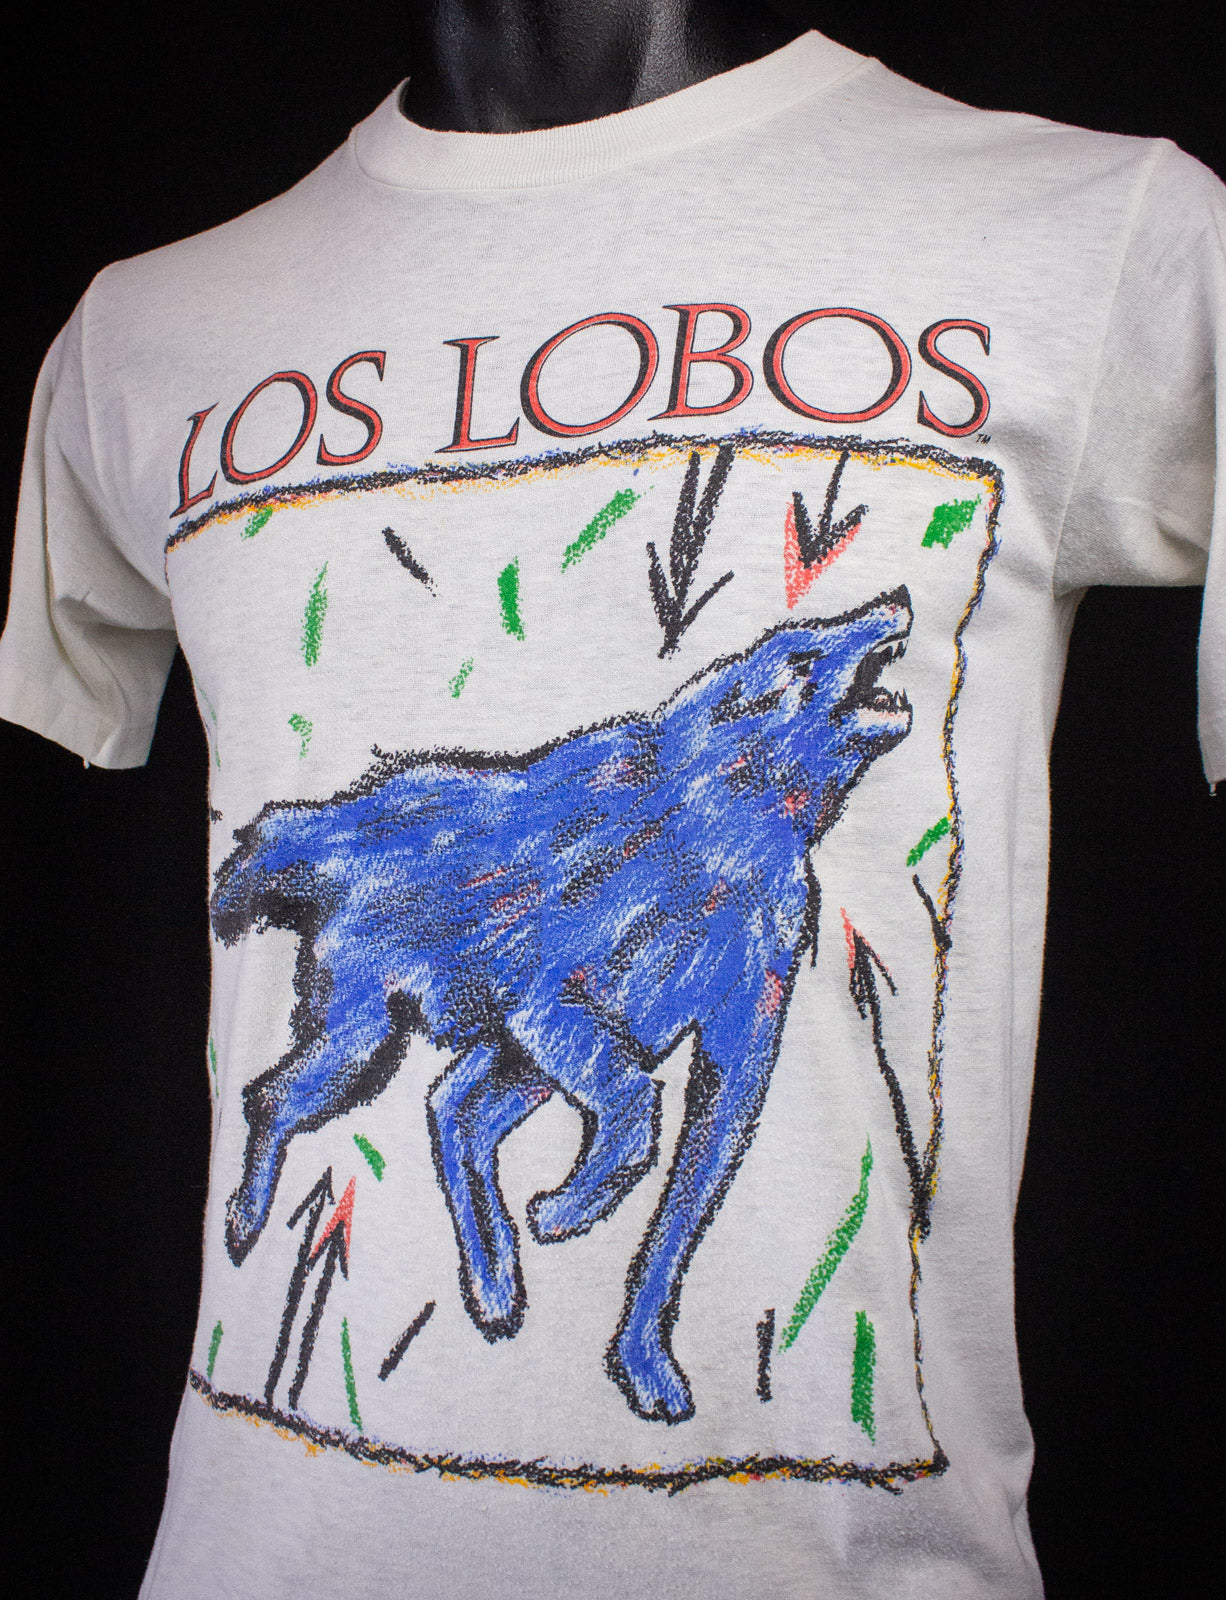 Vintage Los Lobos How Will The Wolf Survive? Concert T Shirt 1985 White Small